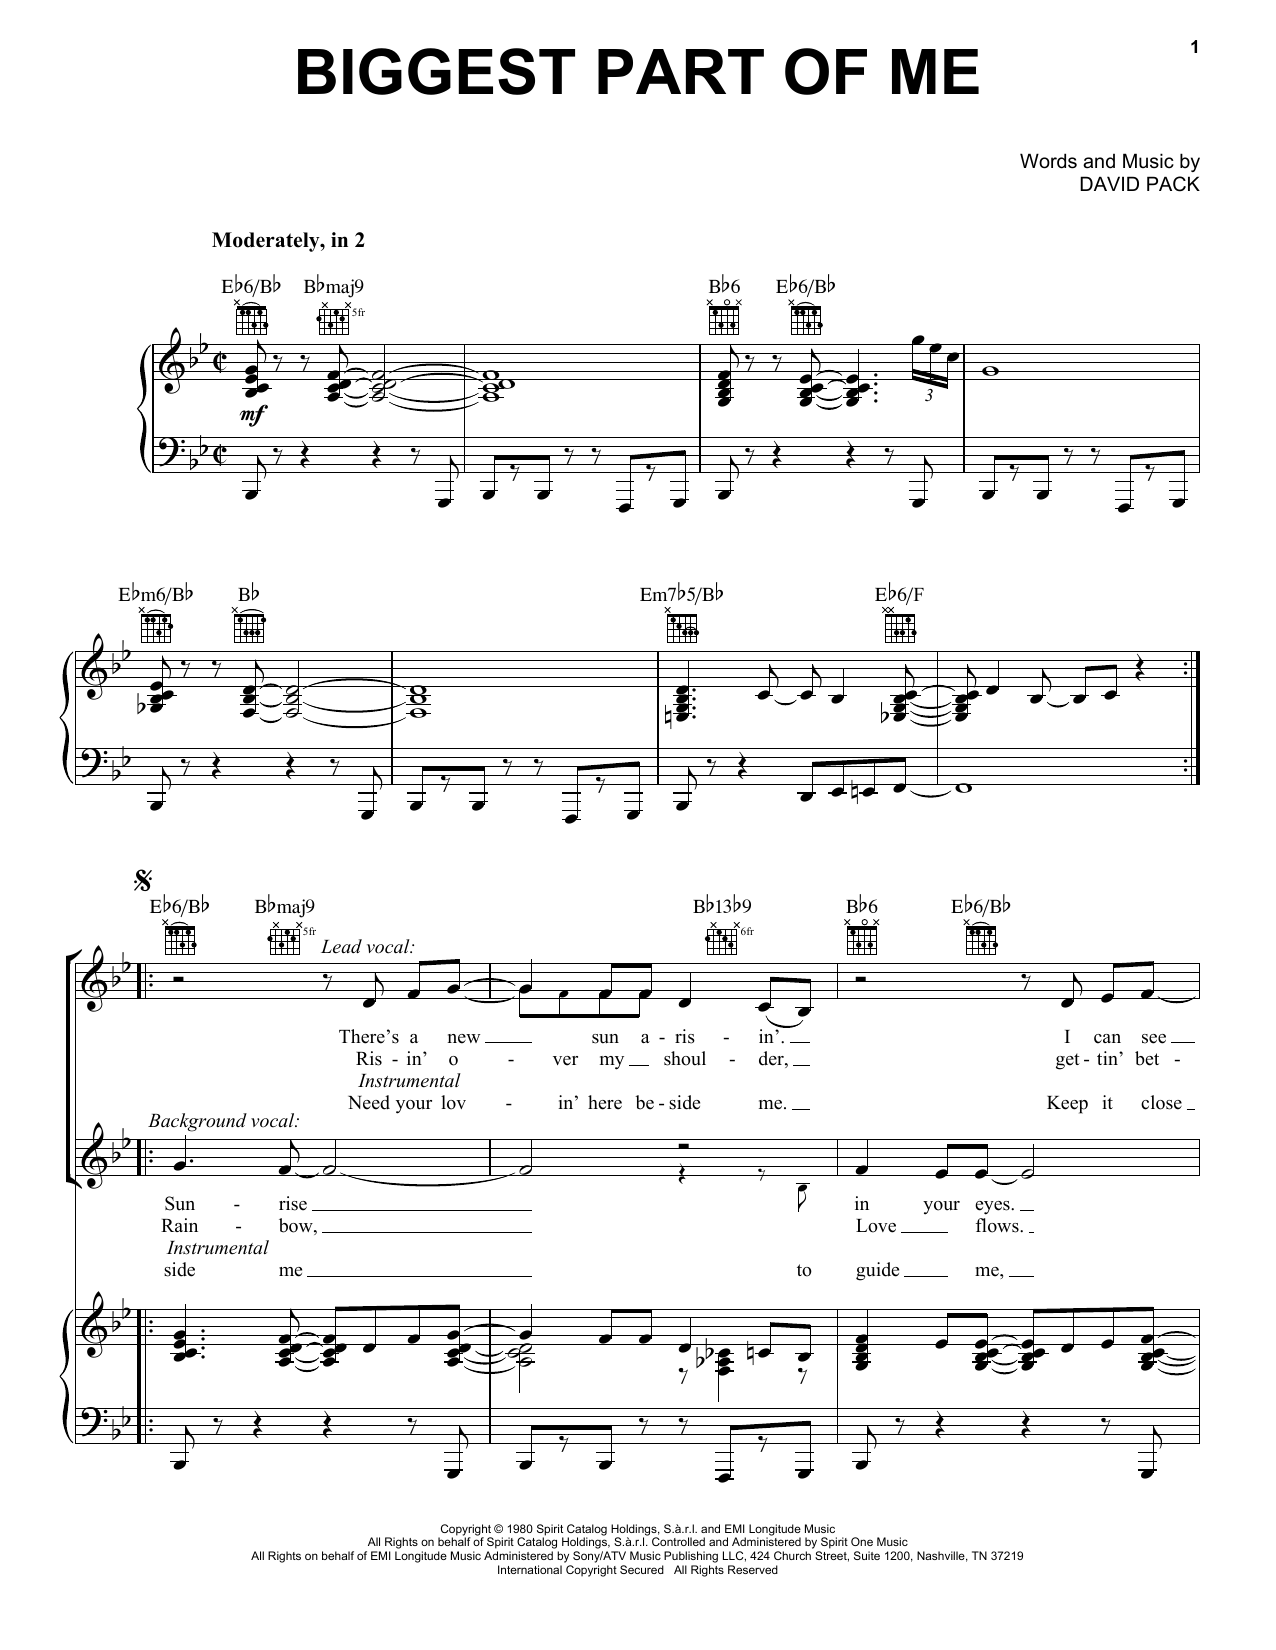 Download Ambrosia Biggest Part Of Me Sheet Music